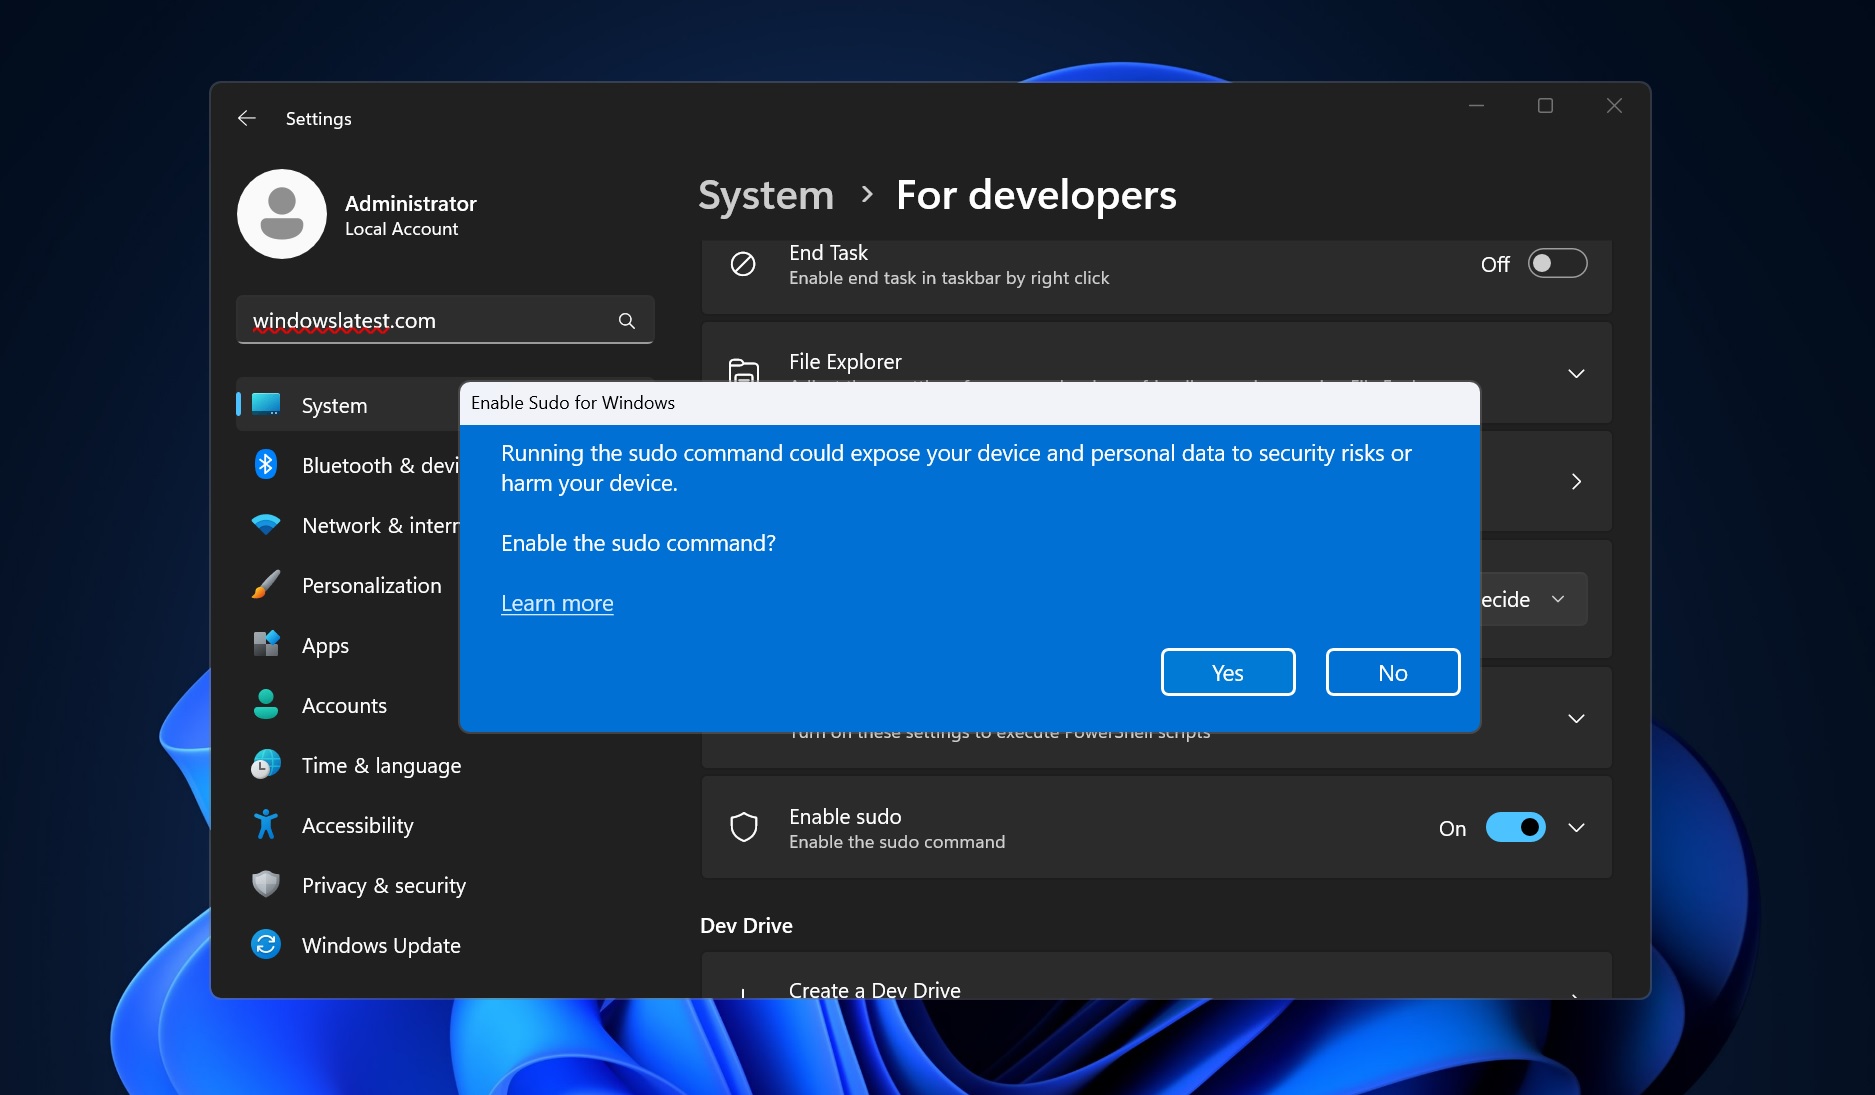 First look: Windows 11 is getting native macOS or Linux-like Sudo command